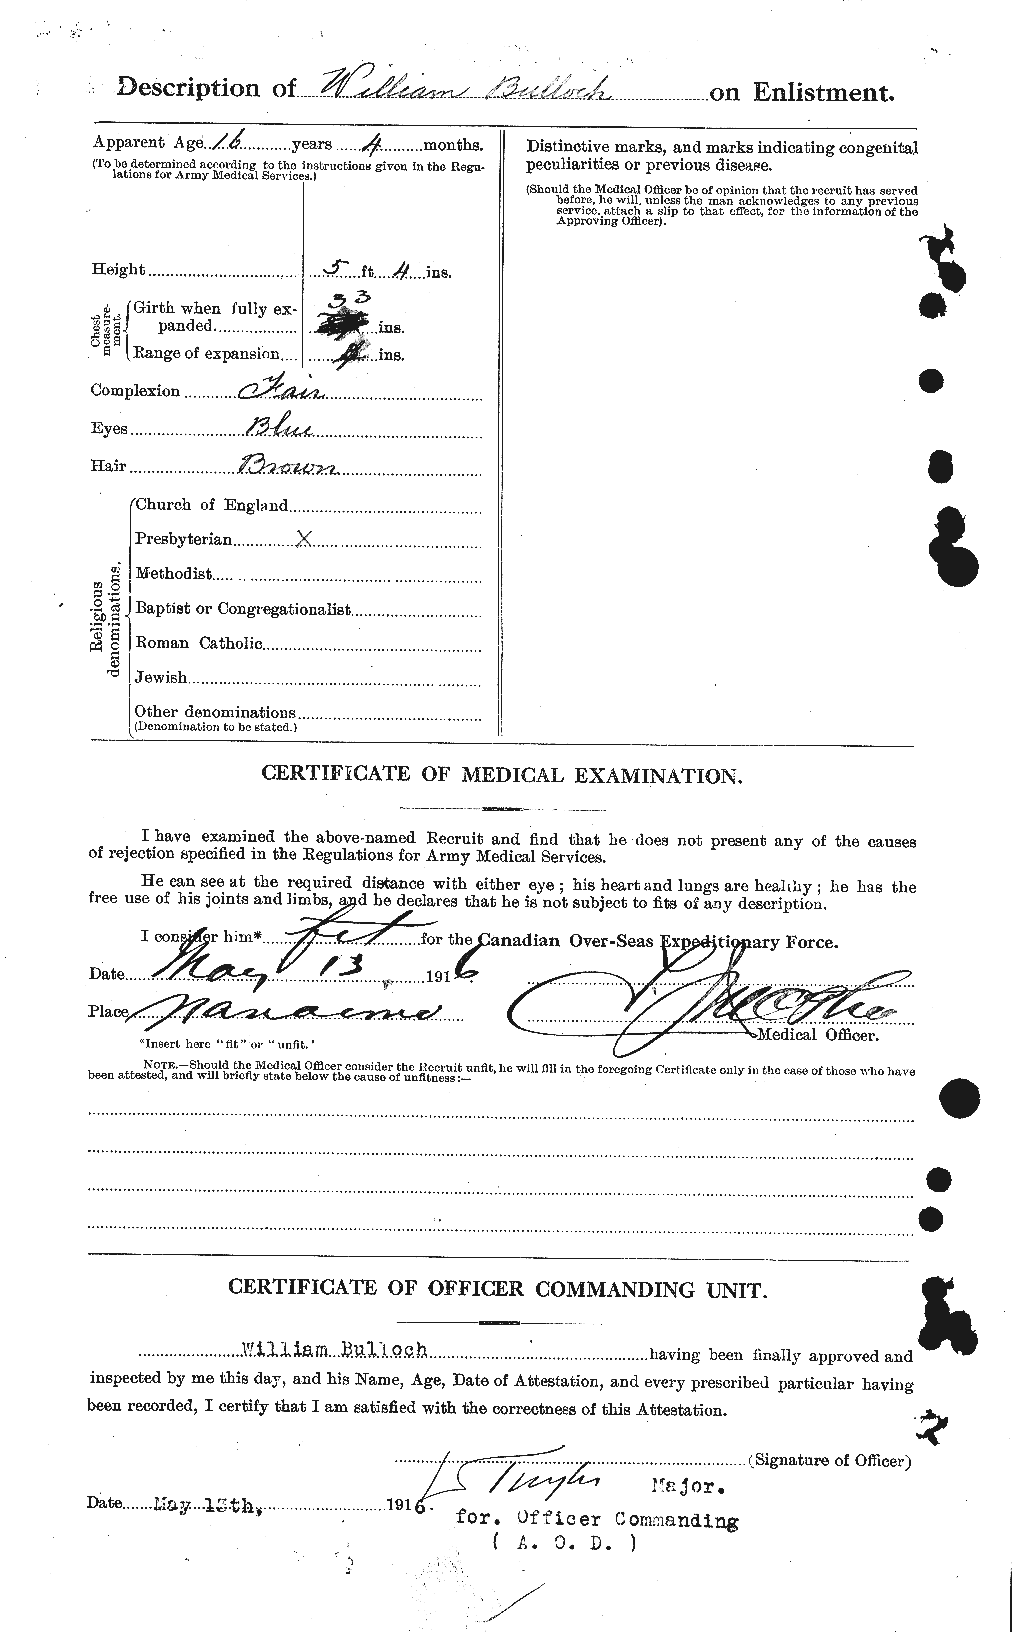 Personnel Records of the First World War - CEF 269758b